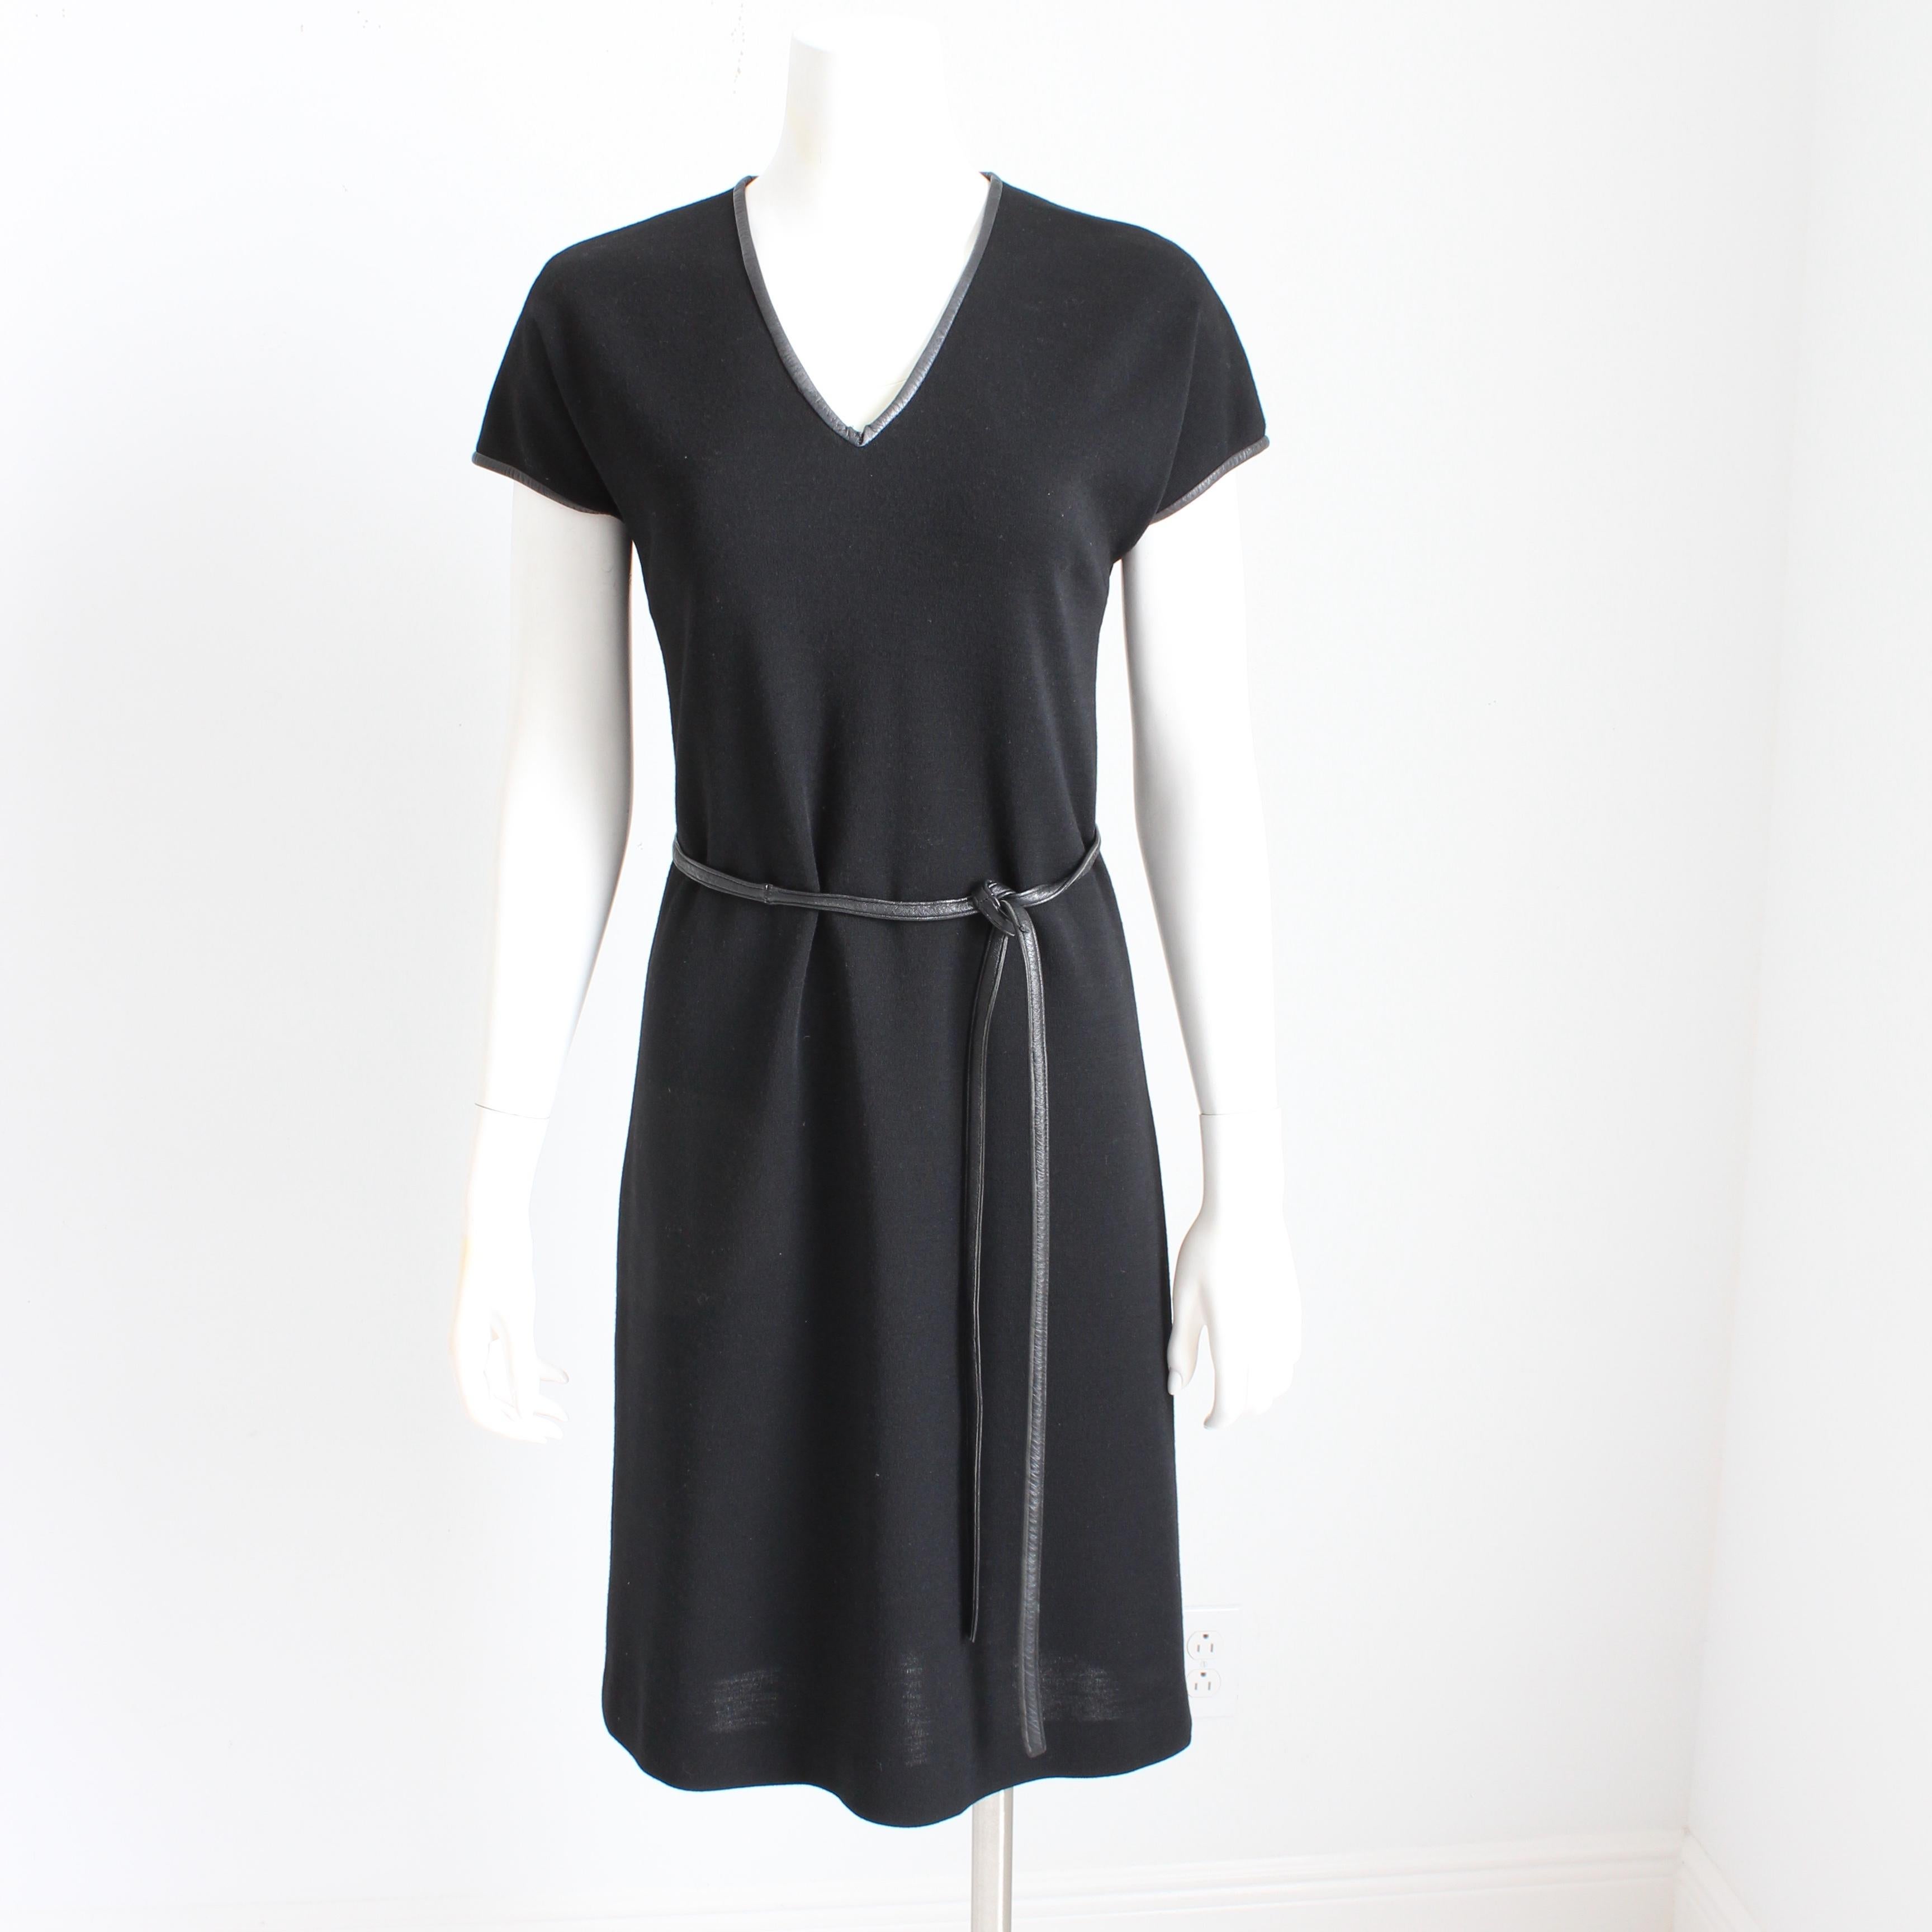 Authentic, preowned, vintage Bonnie Cashin for Sills black knit v-neck dress with matching leather string belt, circa the 60s. Ultra mod! 

Made from a black wool jersey fabric, it features a v-neck and cap sleeves, and is trimmed in black leather.